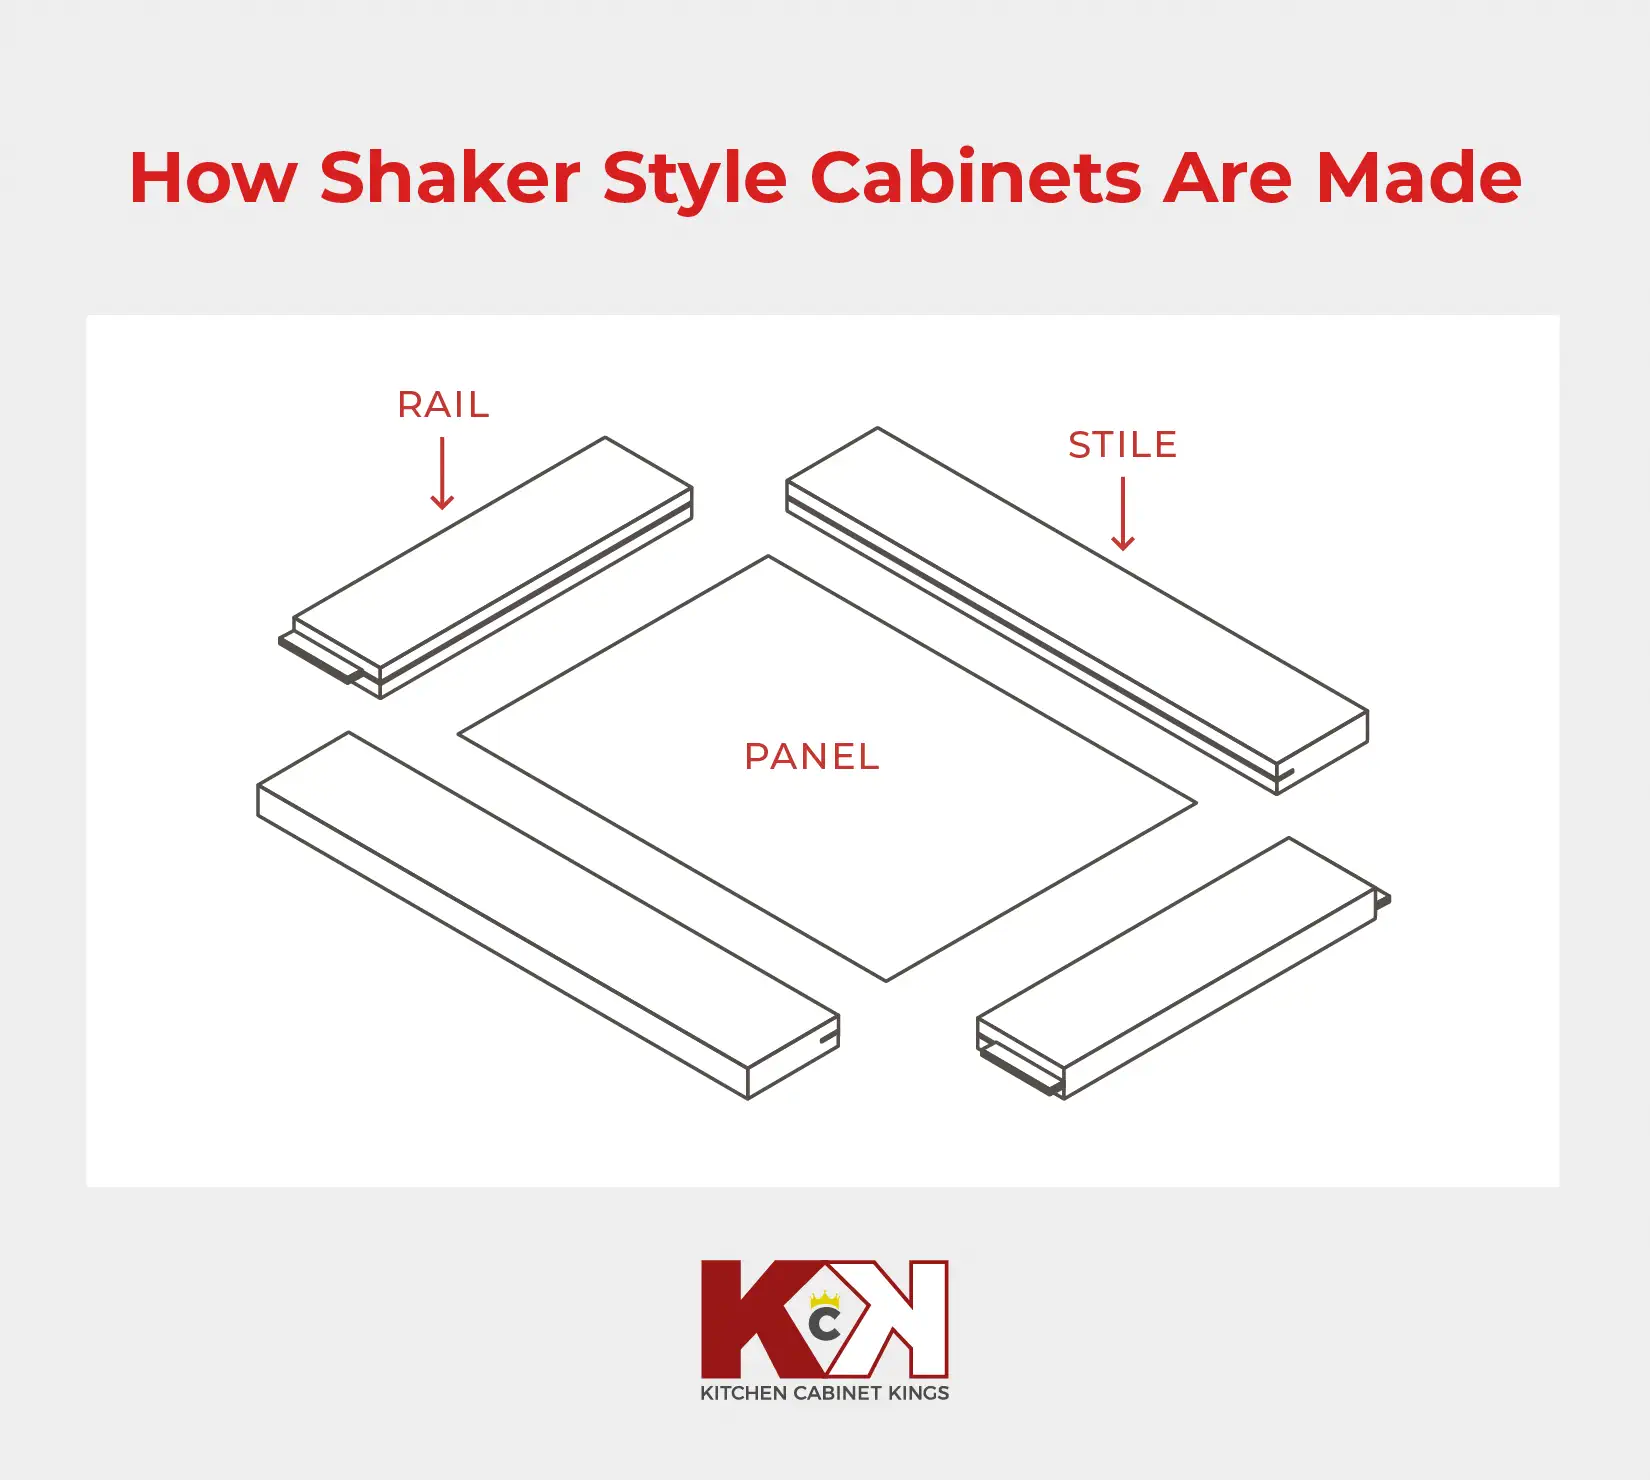 Shaker style cabinet construction diagram.